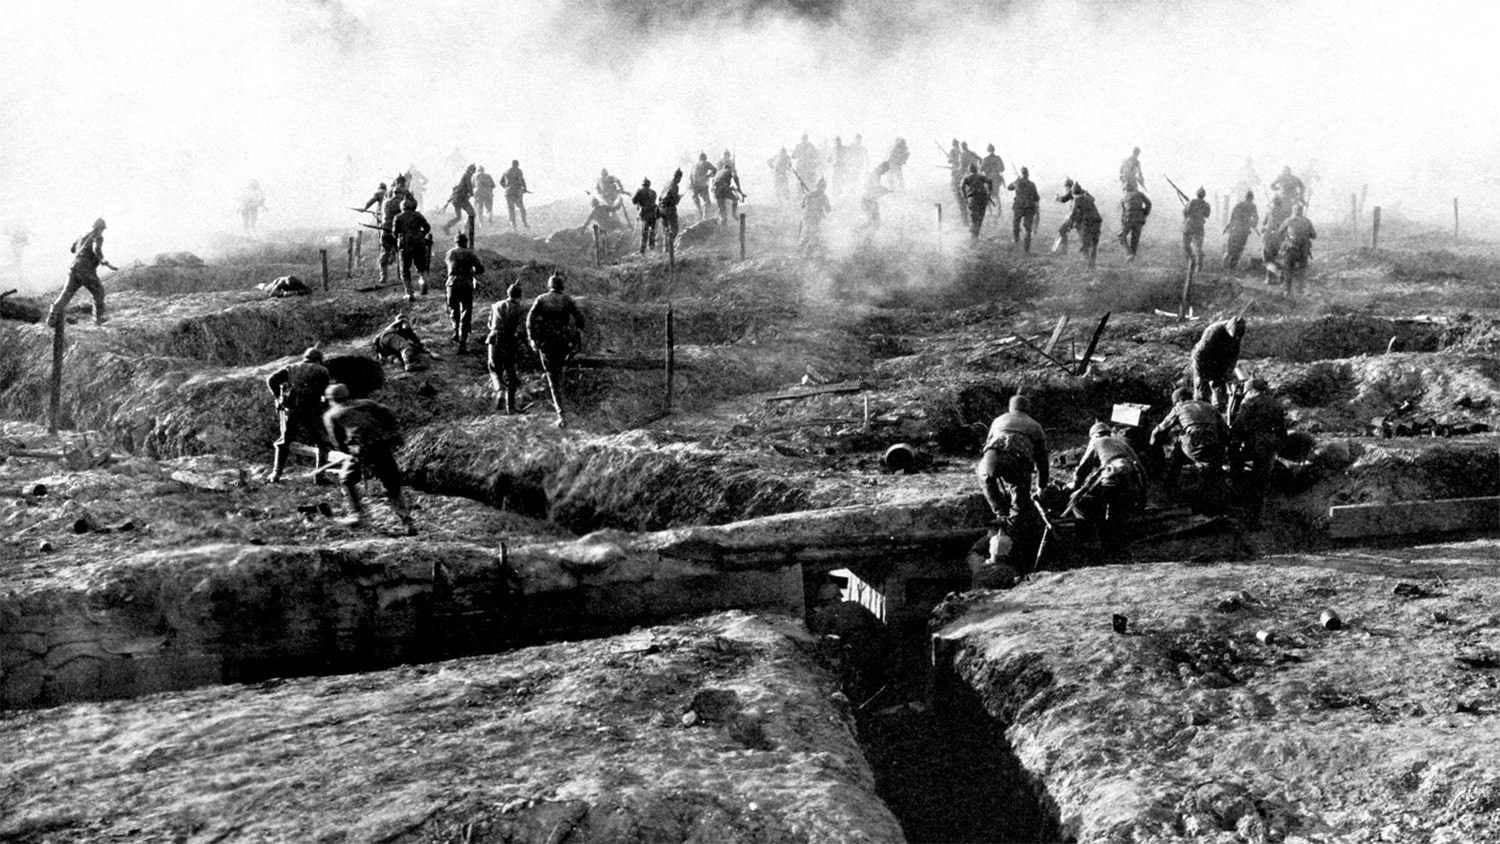 37 interesting facts about World War I